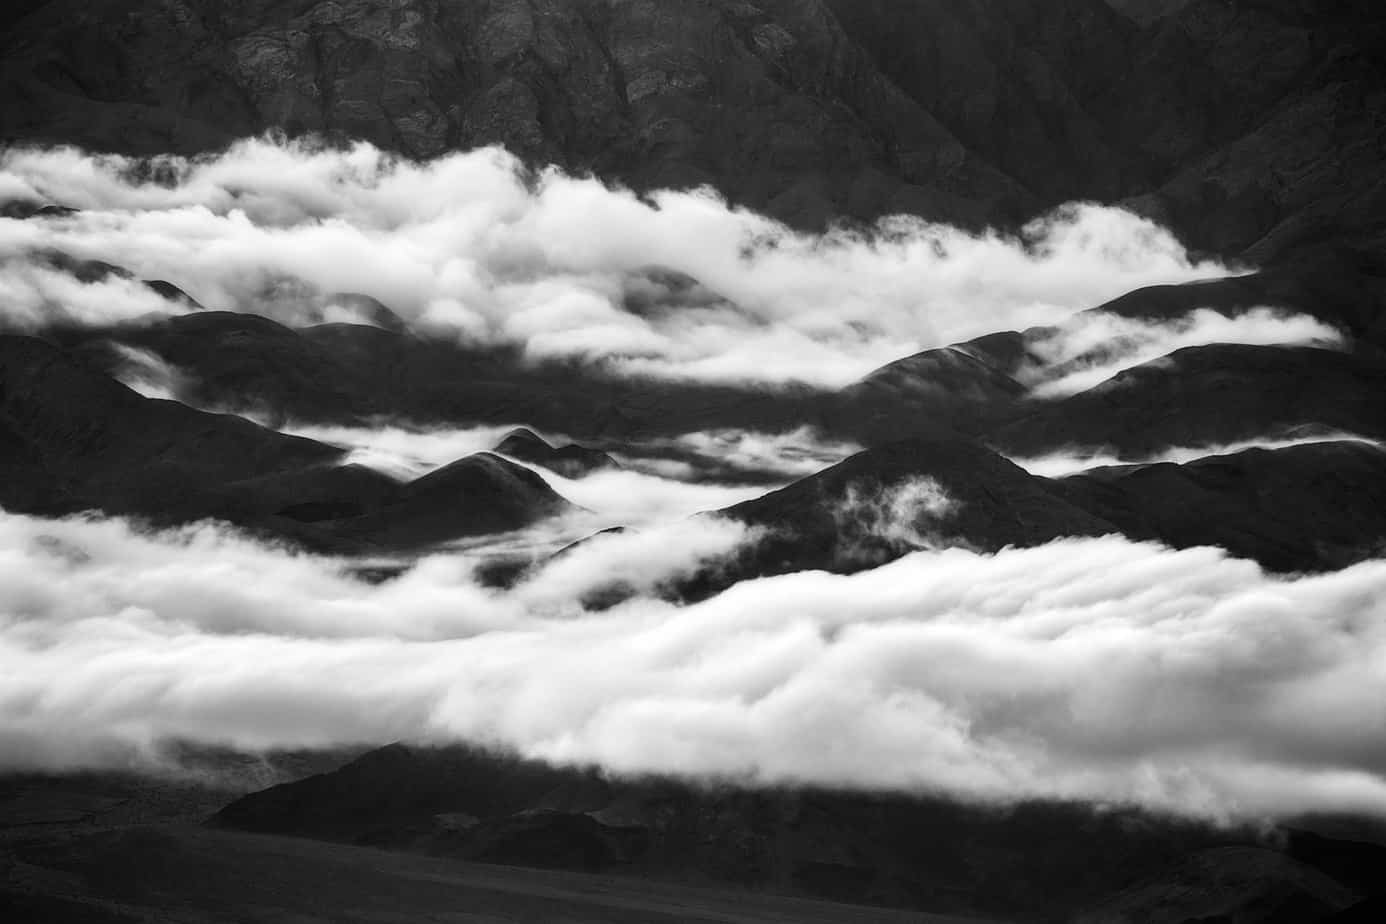 Heavy Rains Leave a Low Blanket of Clouds Hanging Over Death Valley (Death Valley National Park, California)